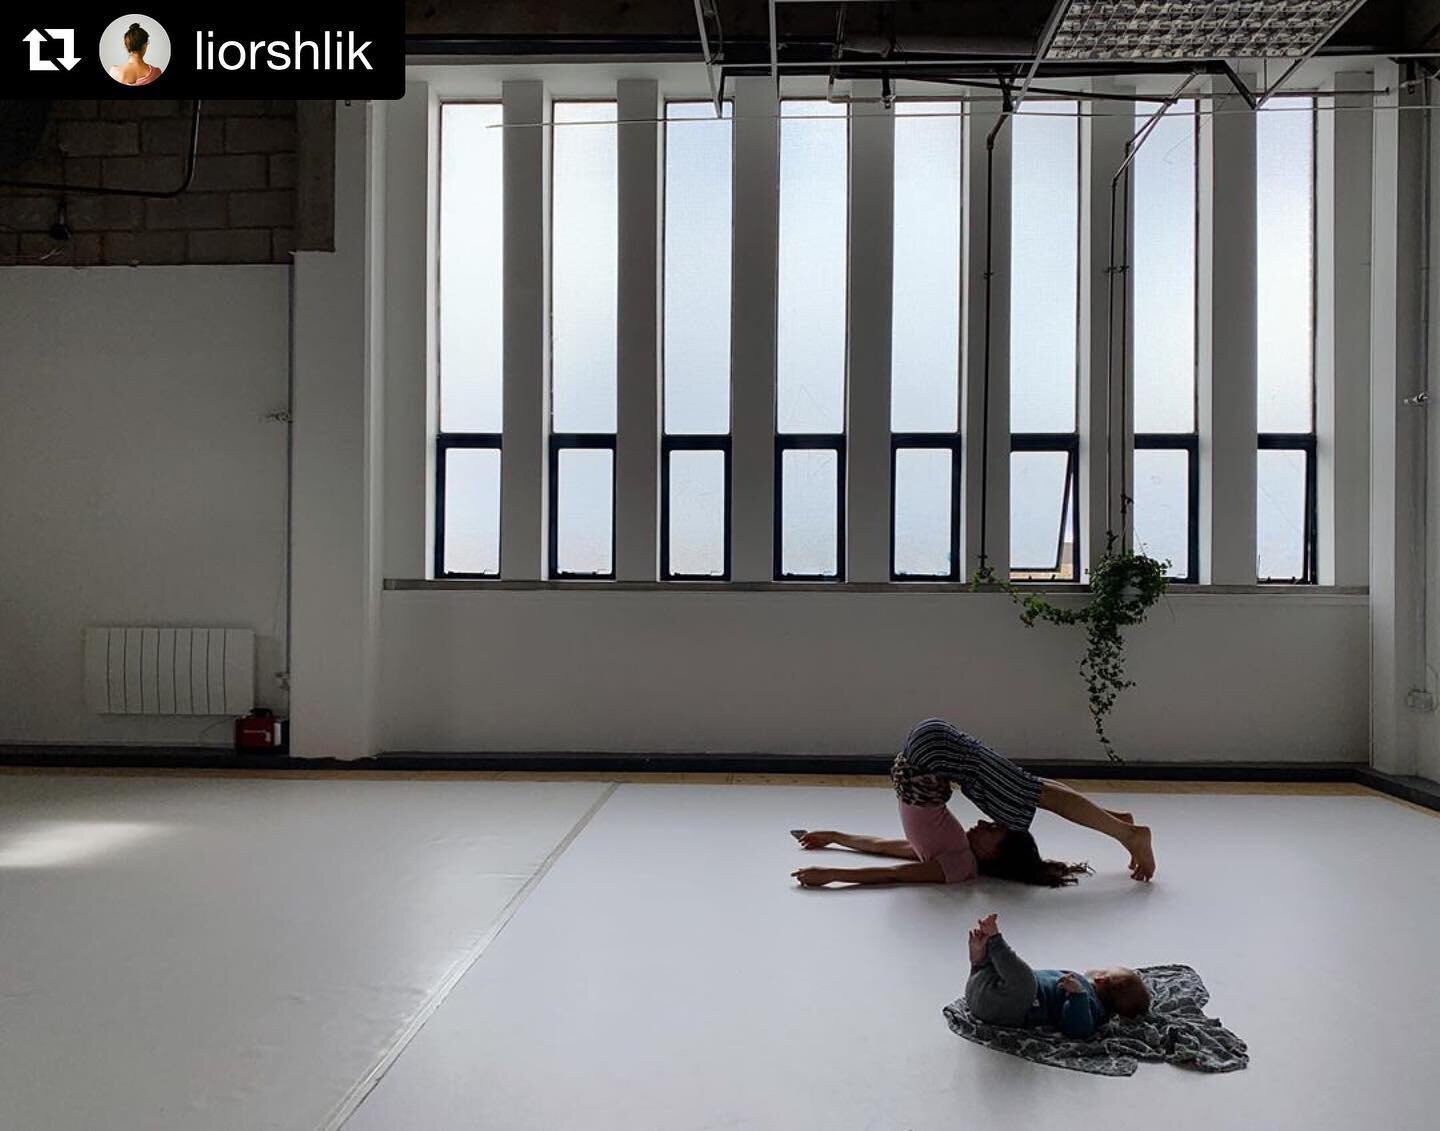 Memories of Freedom #Repost by @liorshlik 🤍 ✋🏽
・・・
I carried Tommy all the way to London to have a Yoga session with his auntie @sivan.rubinstein at her beautiful studio @ohcreativespace 🖤